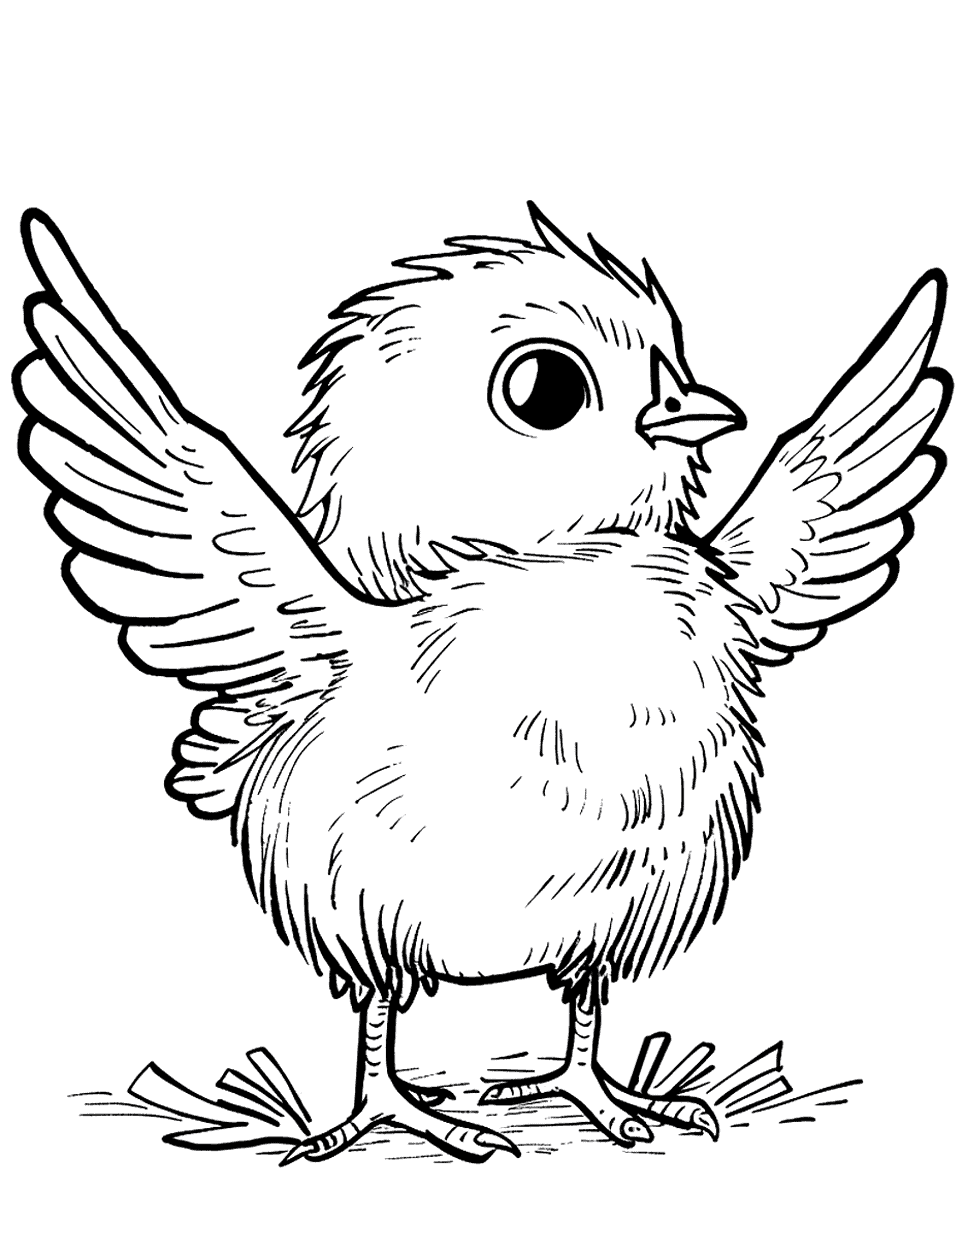 Chick Trying to Fly Chicken Coloring Page - A determined chick flapping its wings, attempting to take off from the ground.